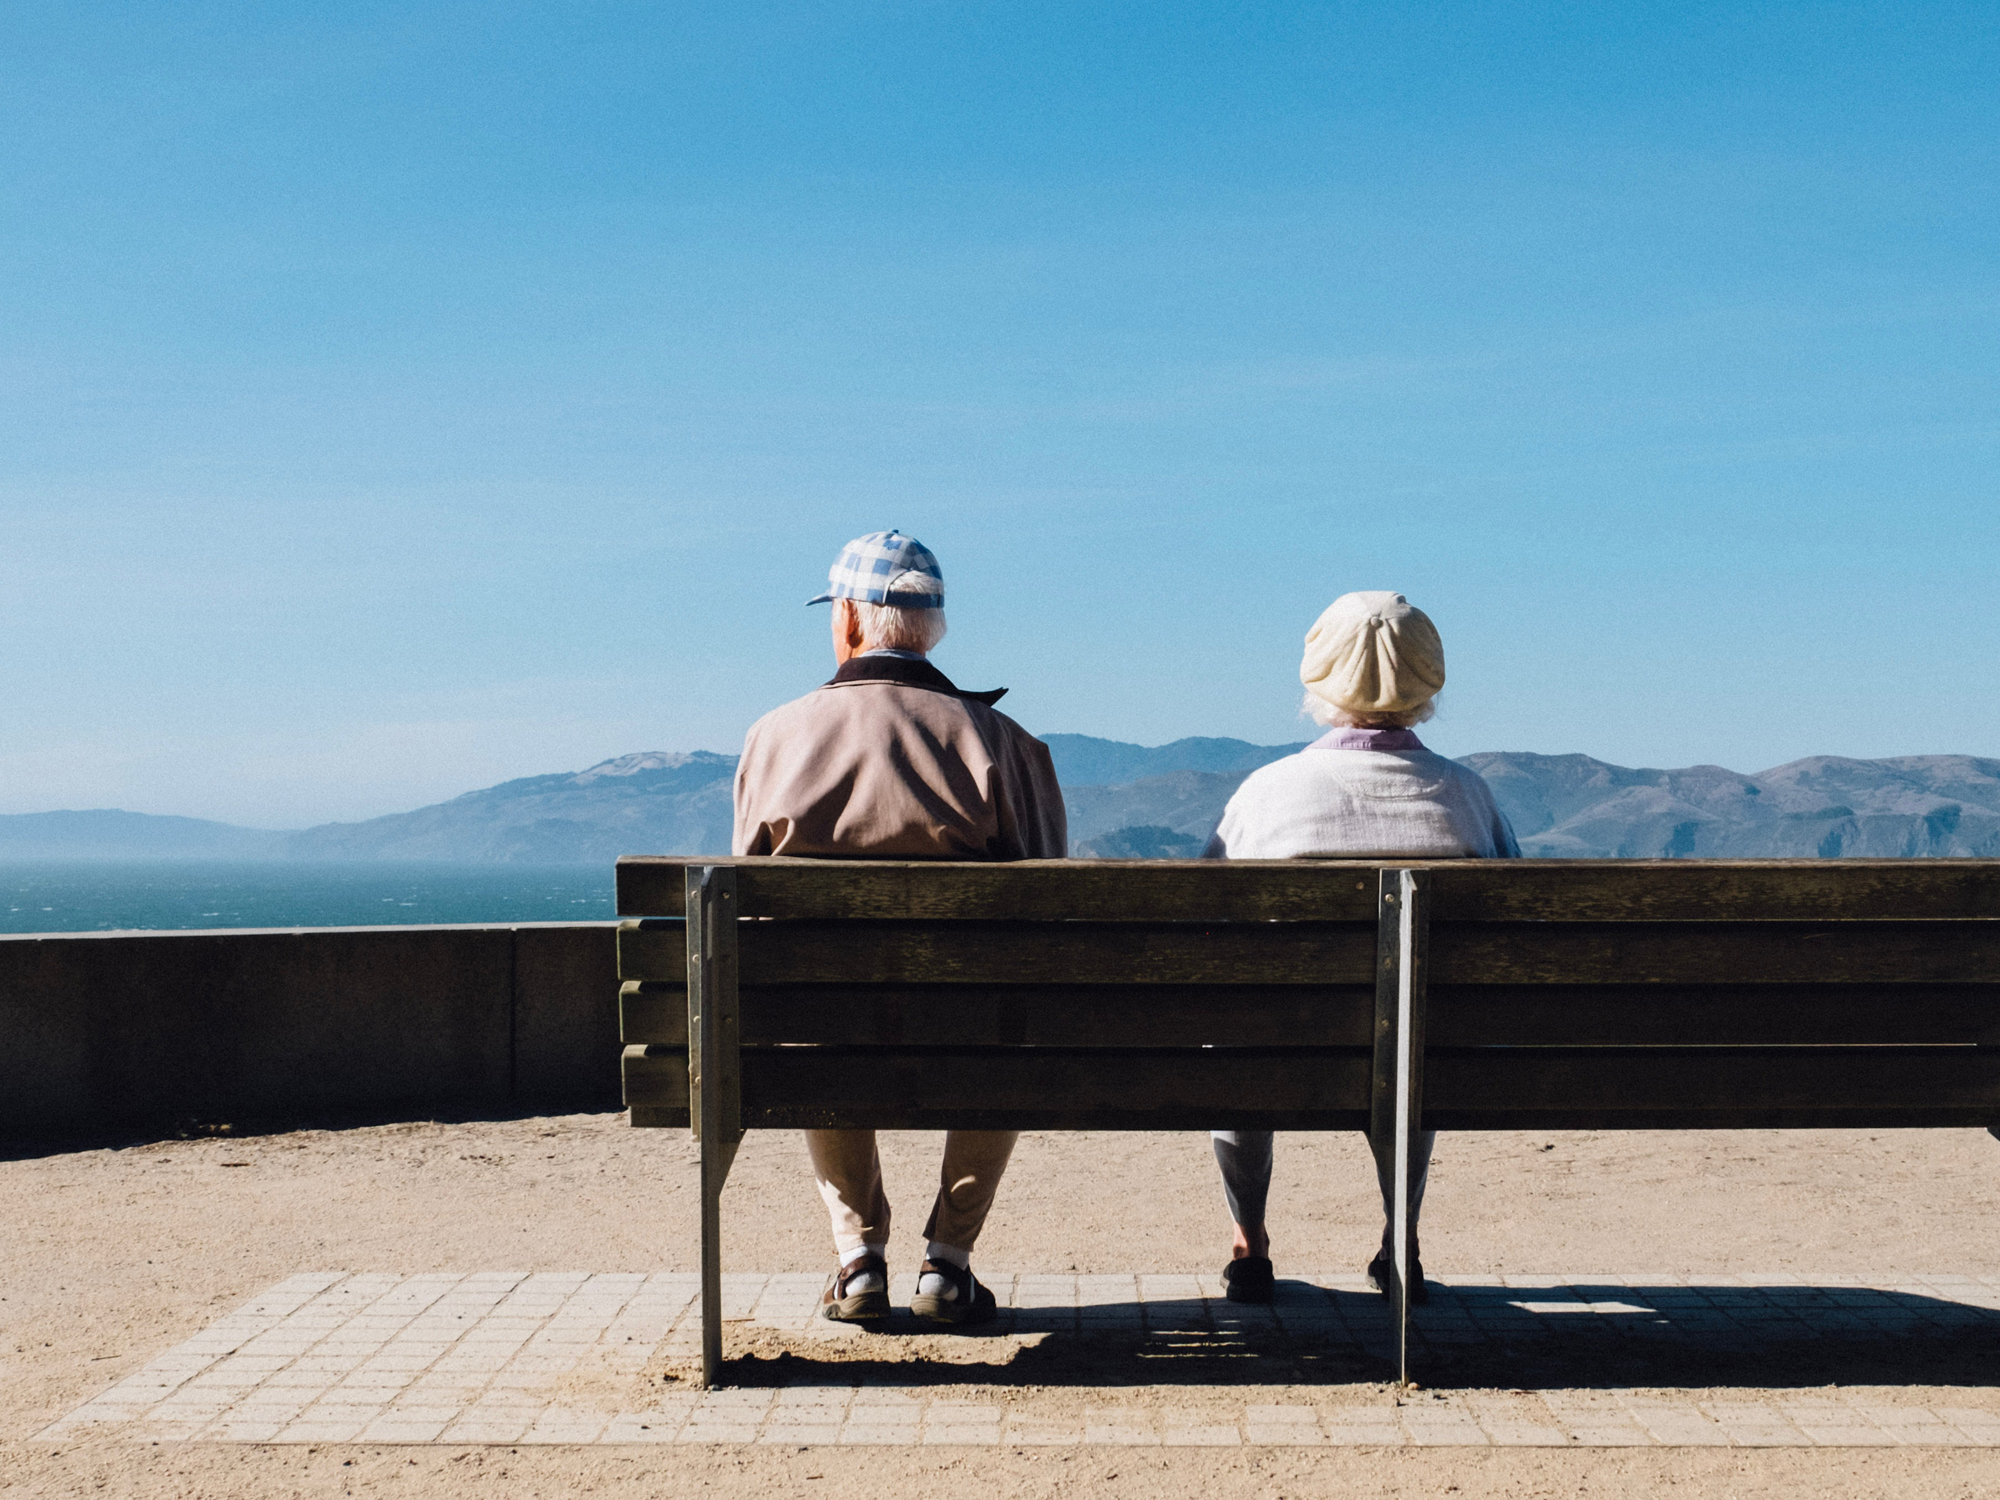 An elderly man and woman sitting on a bench on a scenic overlook in some mountains on a sunny, cloudless day.